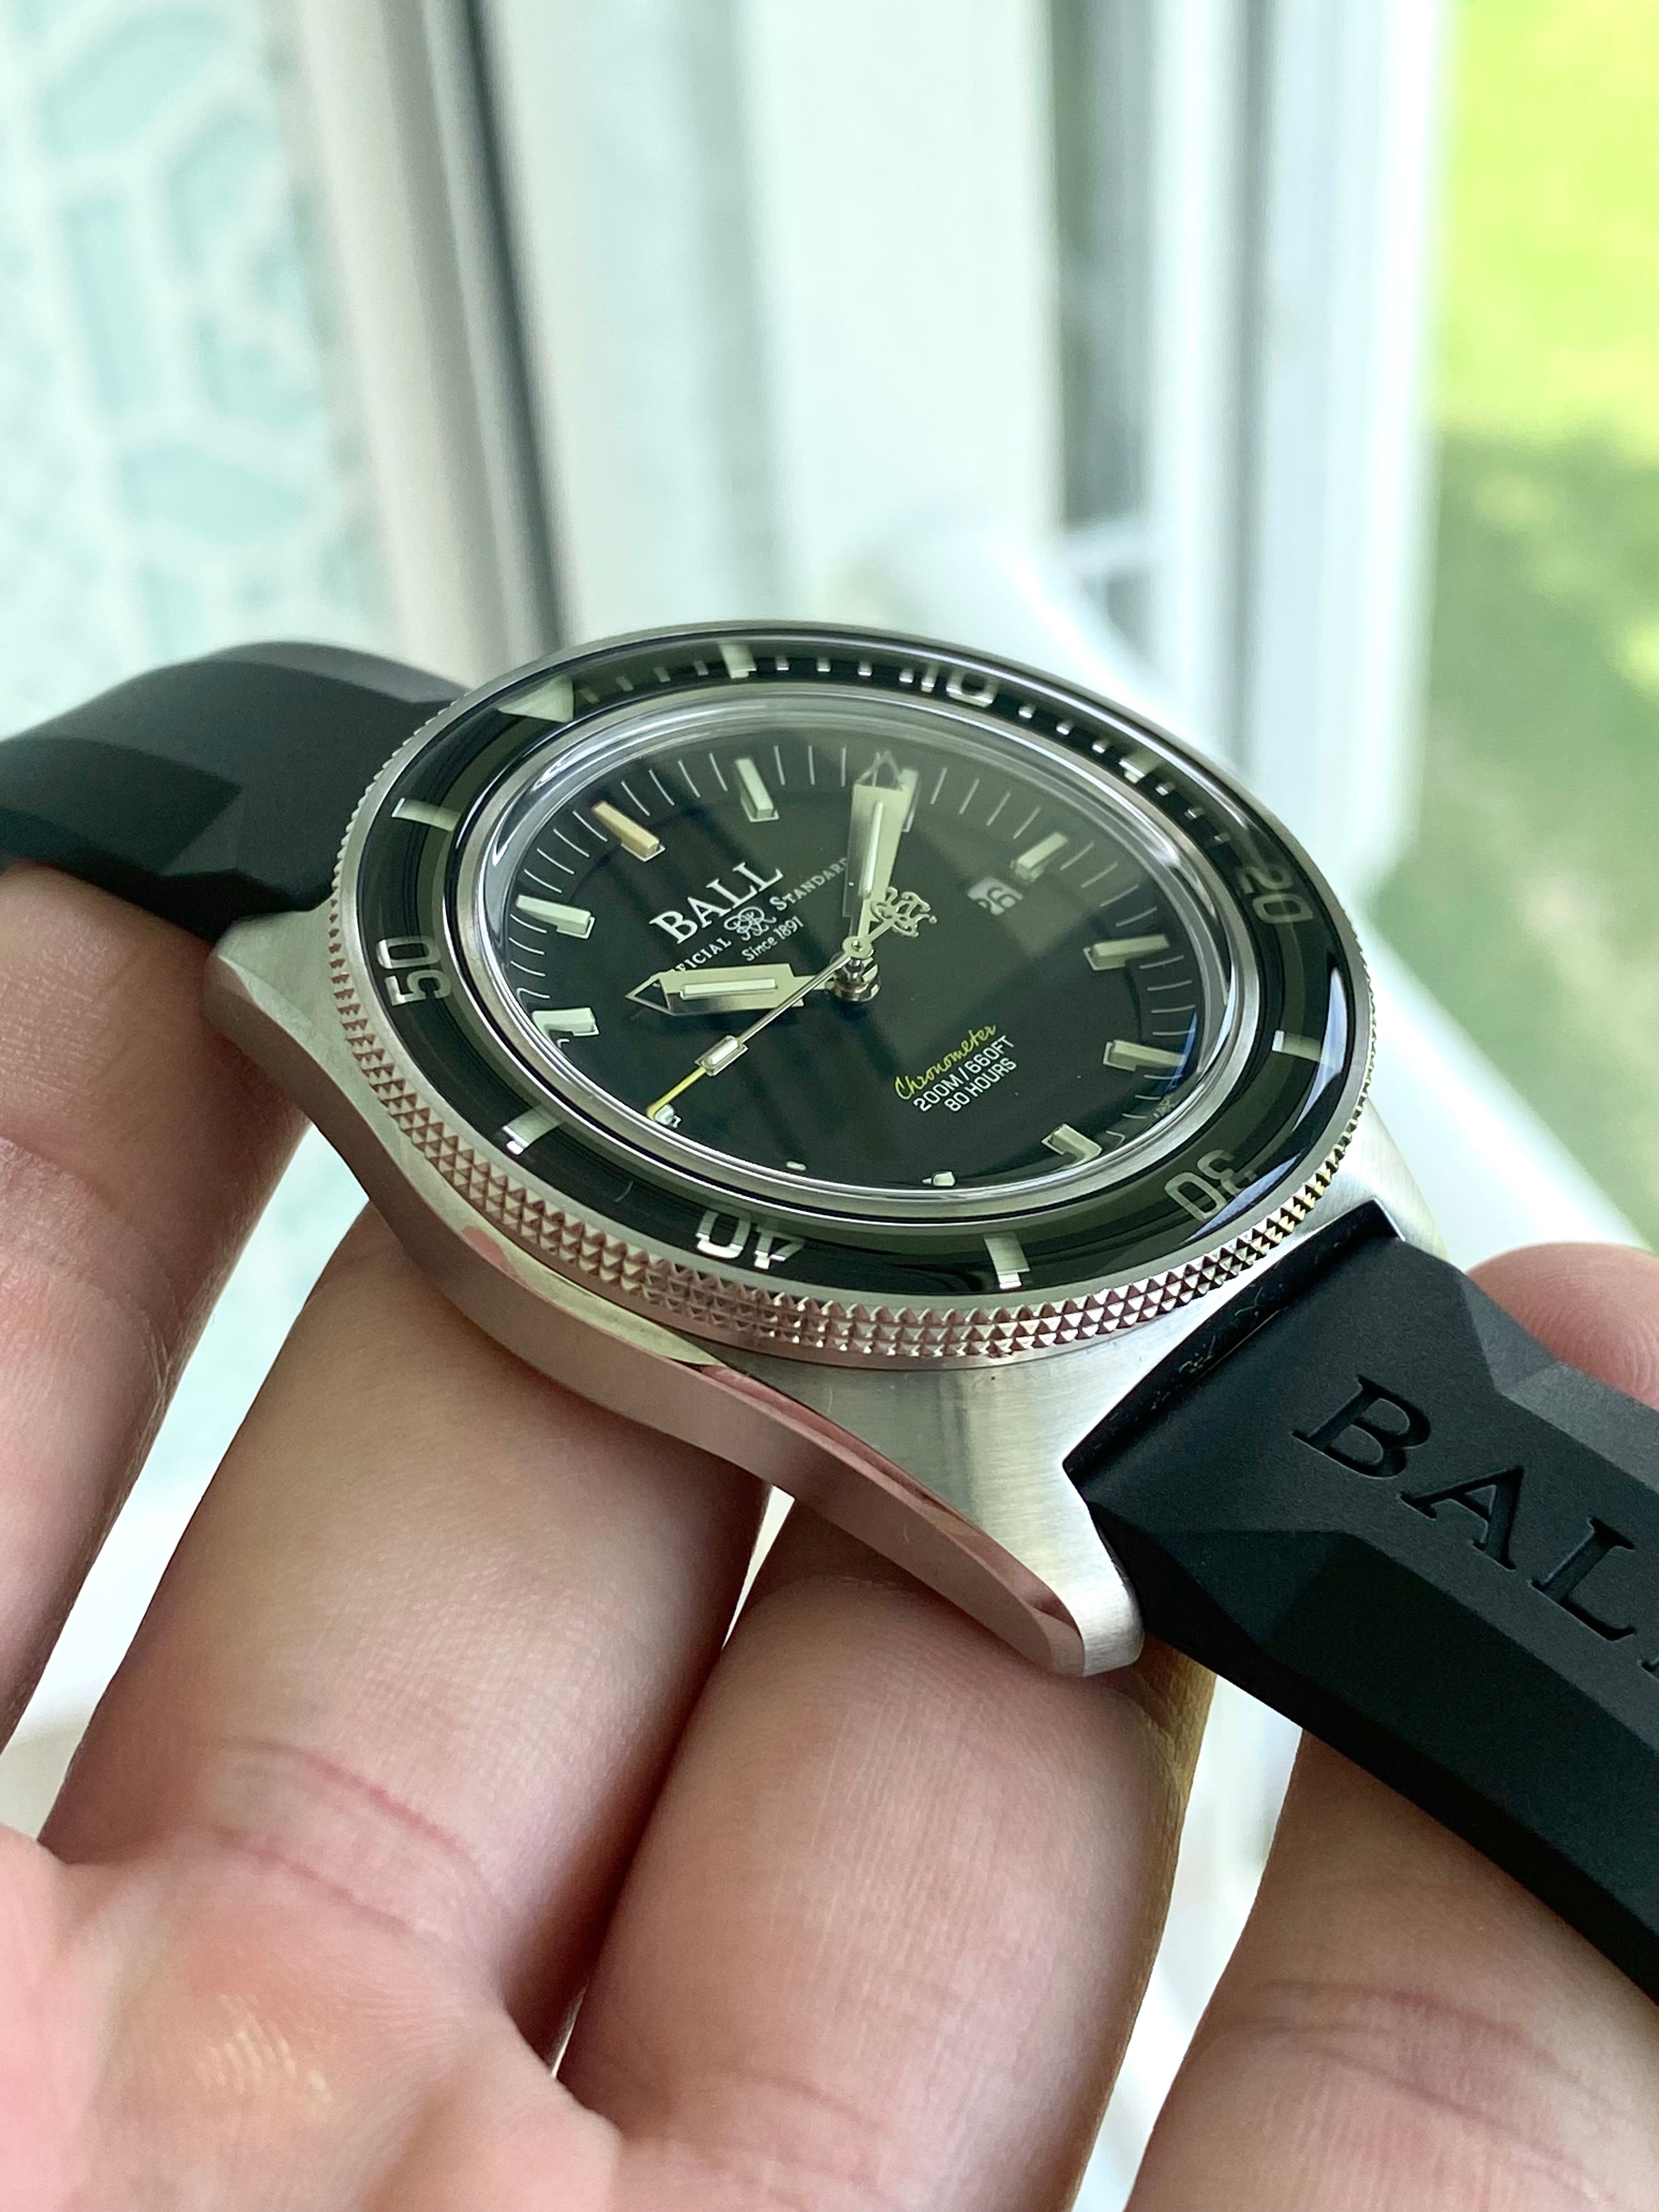 2019 Ball Engineer Master II Skindiver (New/ Box & Papers)